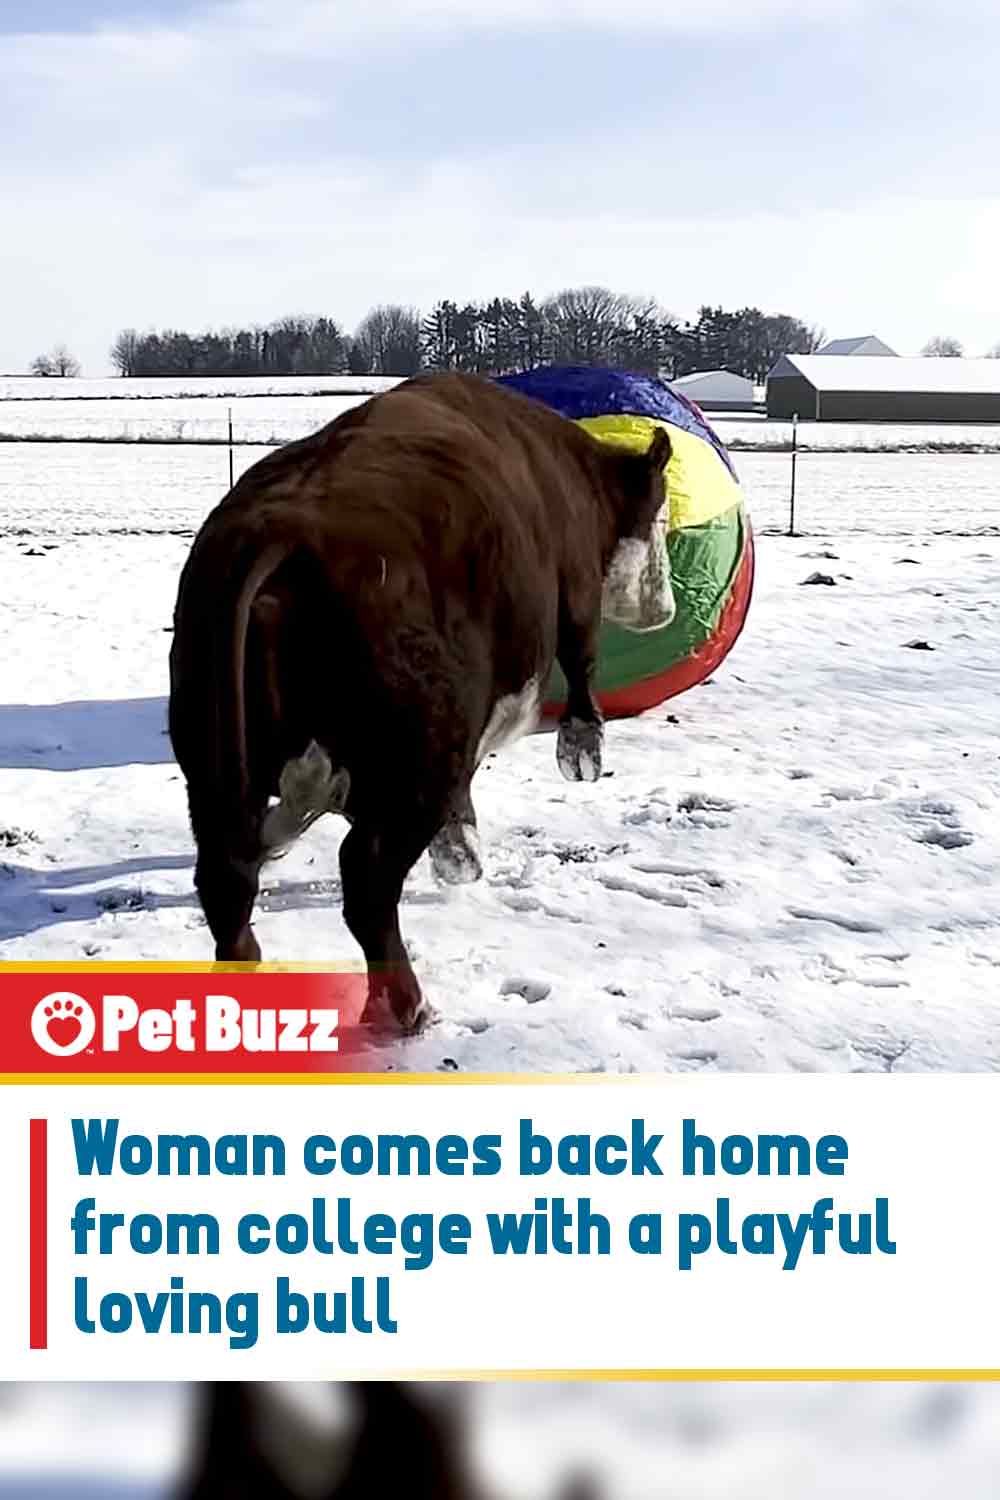 Woman comes back home from college with a playful loving bull